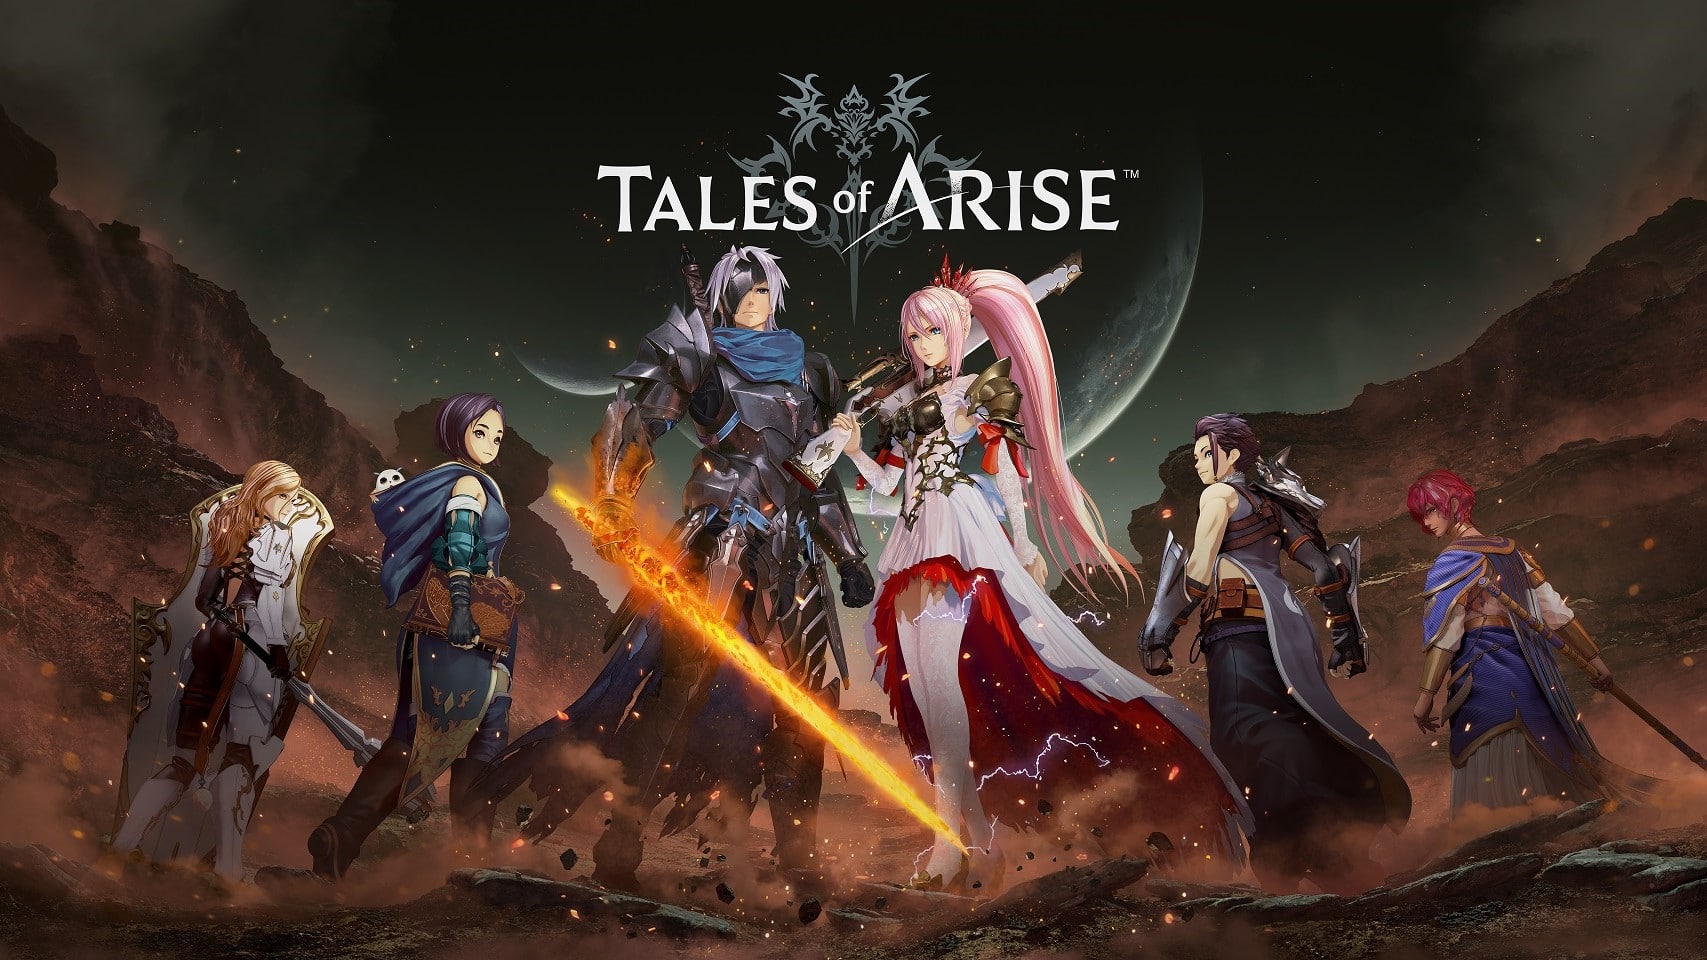 Tales of arise 9